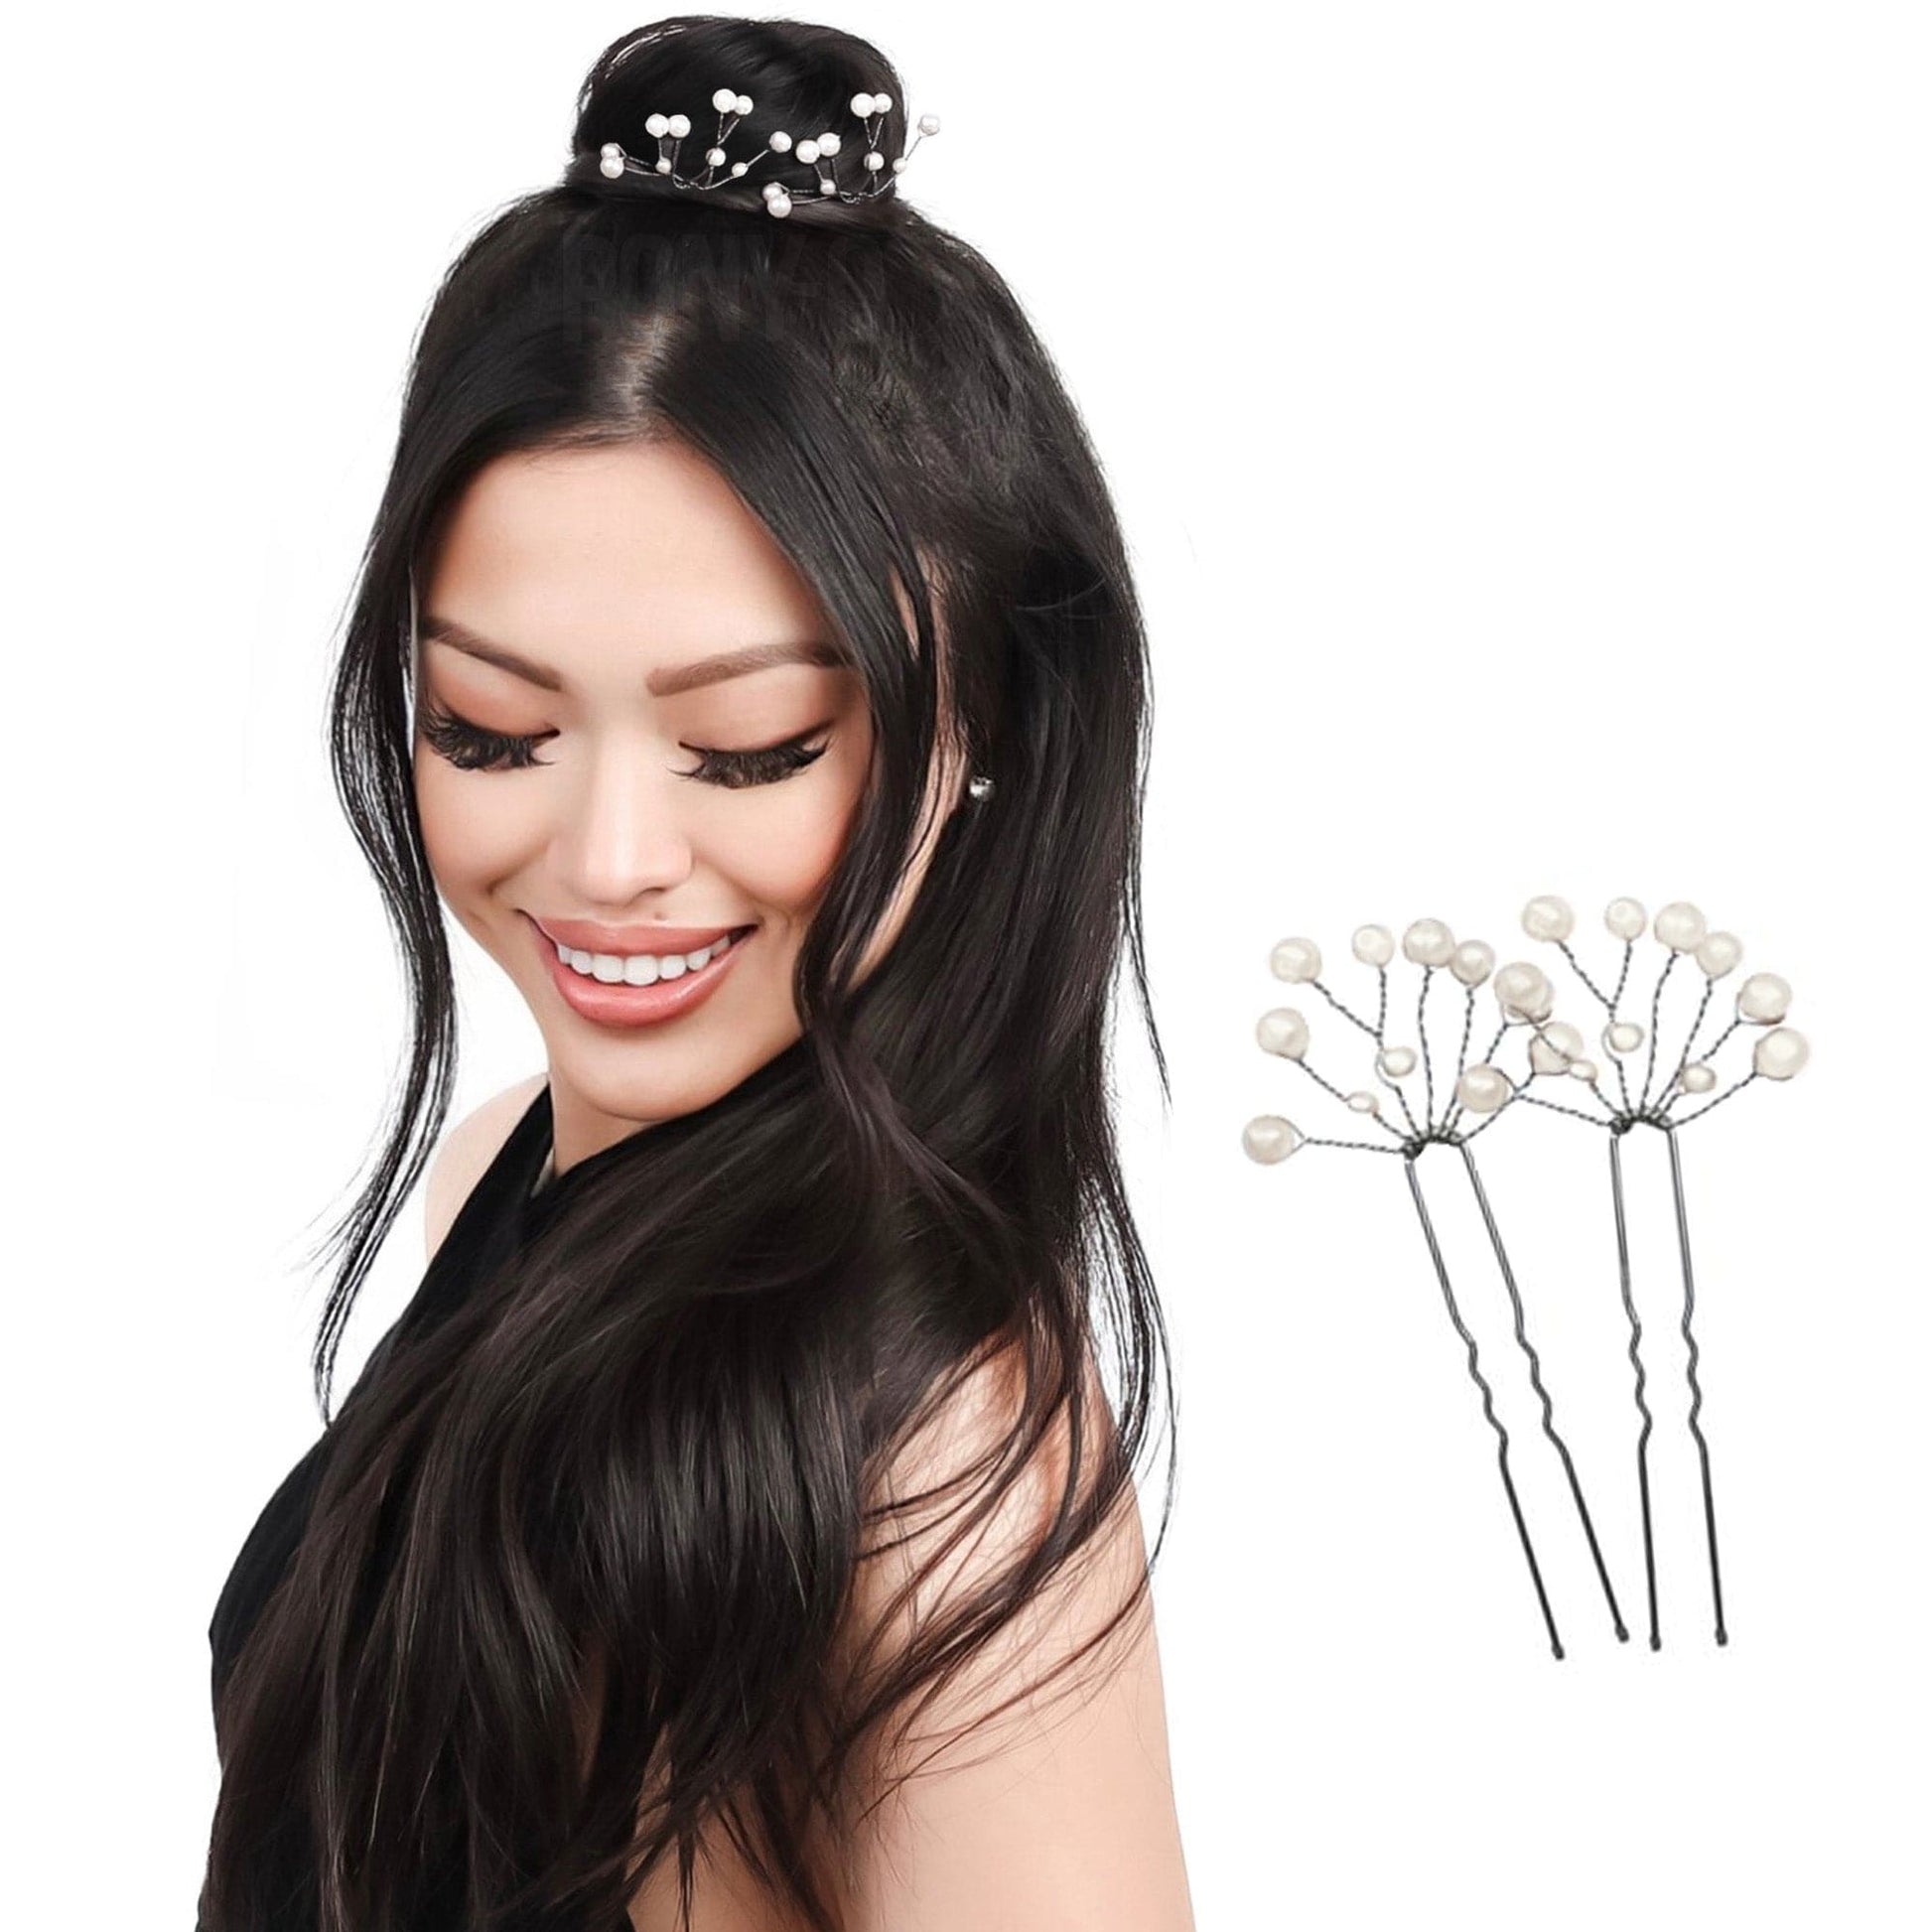 2 pack: Cream Fan cluster PINZ to replace bobby pins.